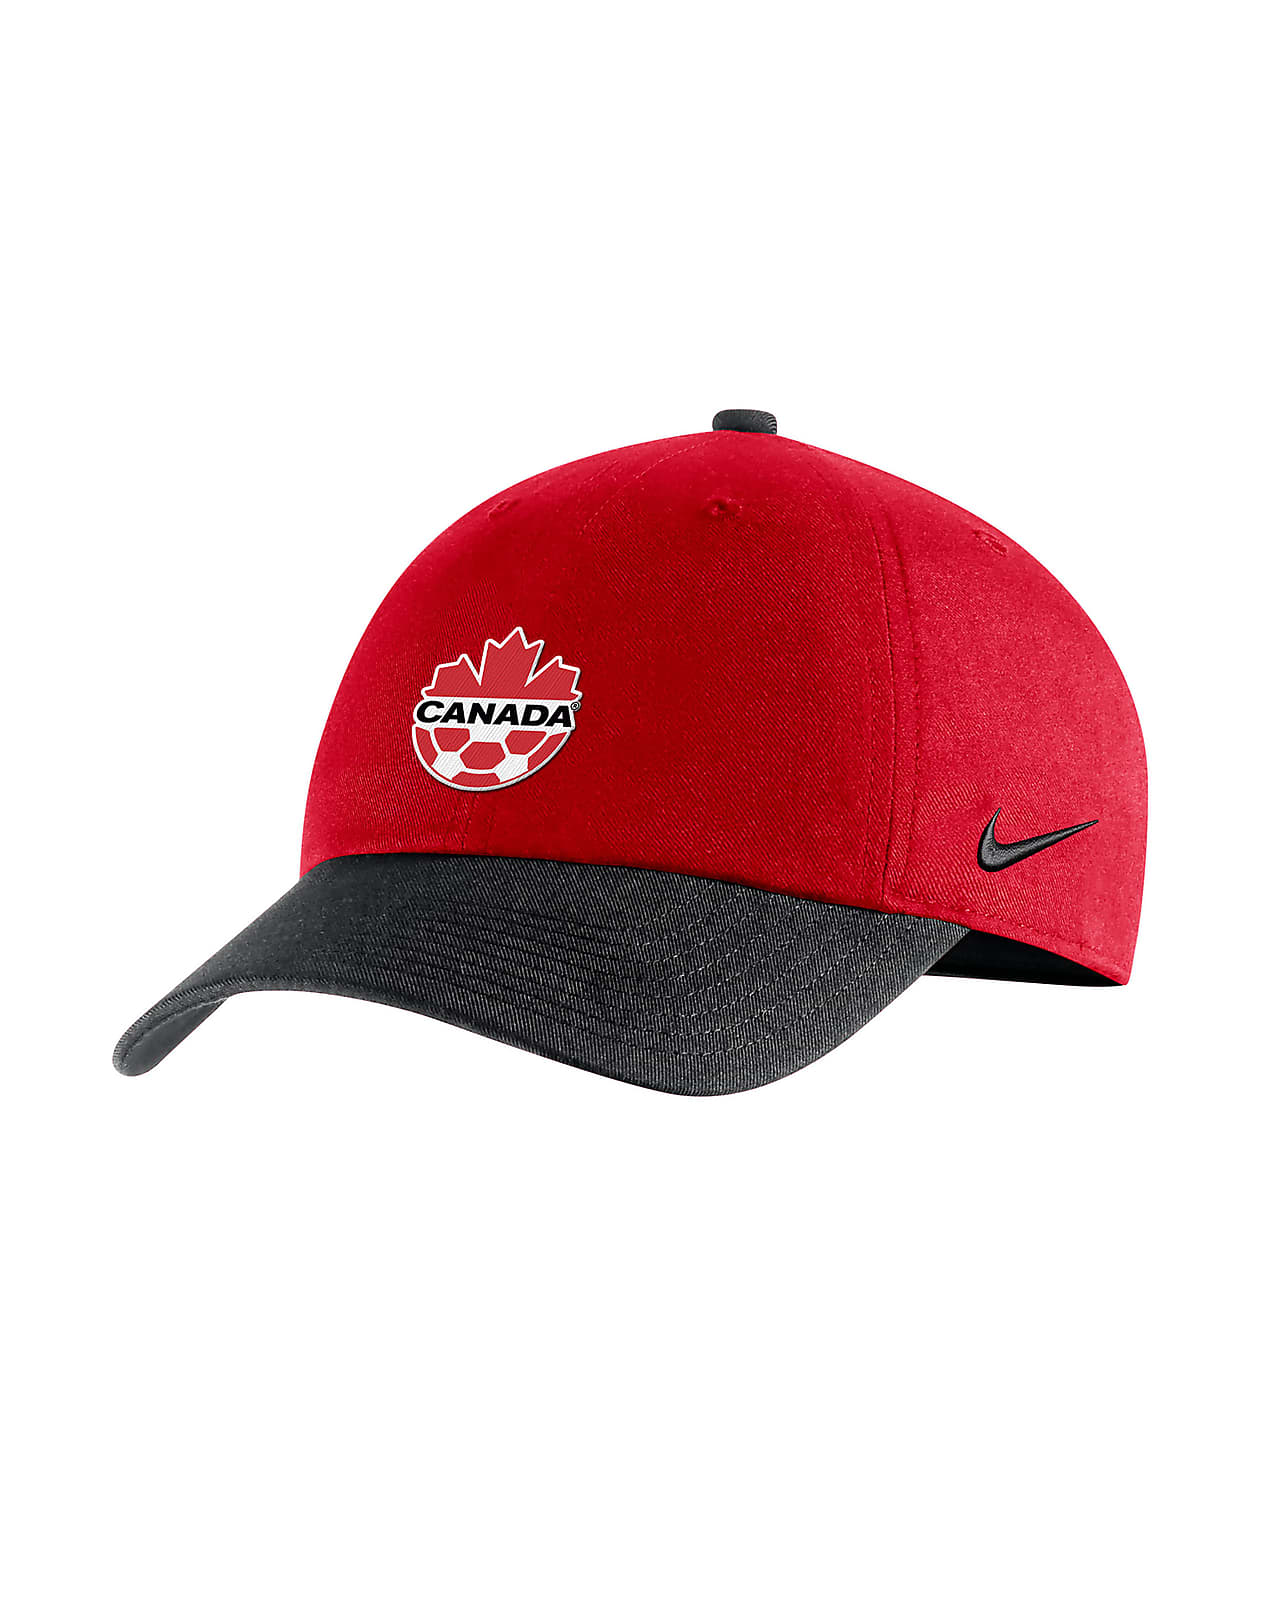 https://static.nike.com/a/images/t_PDP_1280_v1/f_auto,q_auto:eco/c9923559-15a5-4ded-a7ae-fb67304197a3/canada-heritage86-mens-adjustable-hat-cmFLff.png